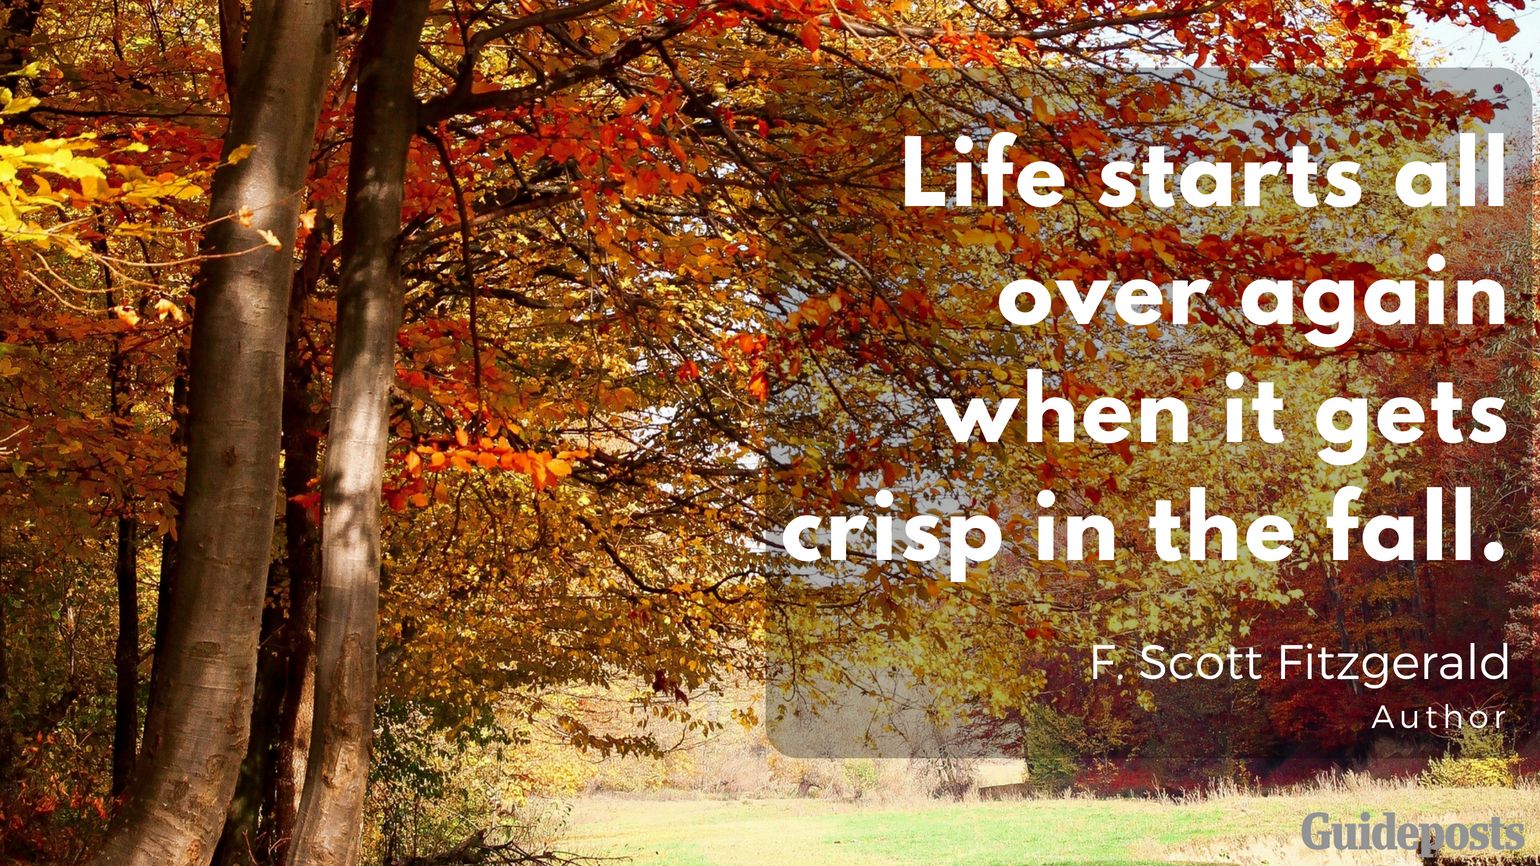 Life starts all over again when it gets crisp in the fall. —F. Scott Fitzgerald